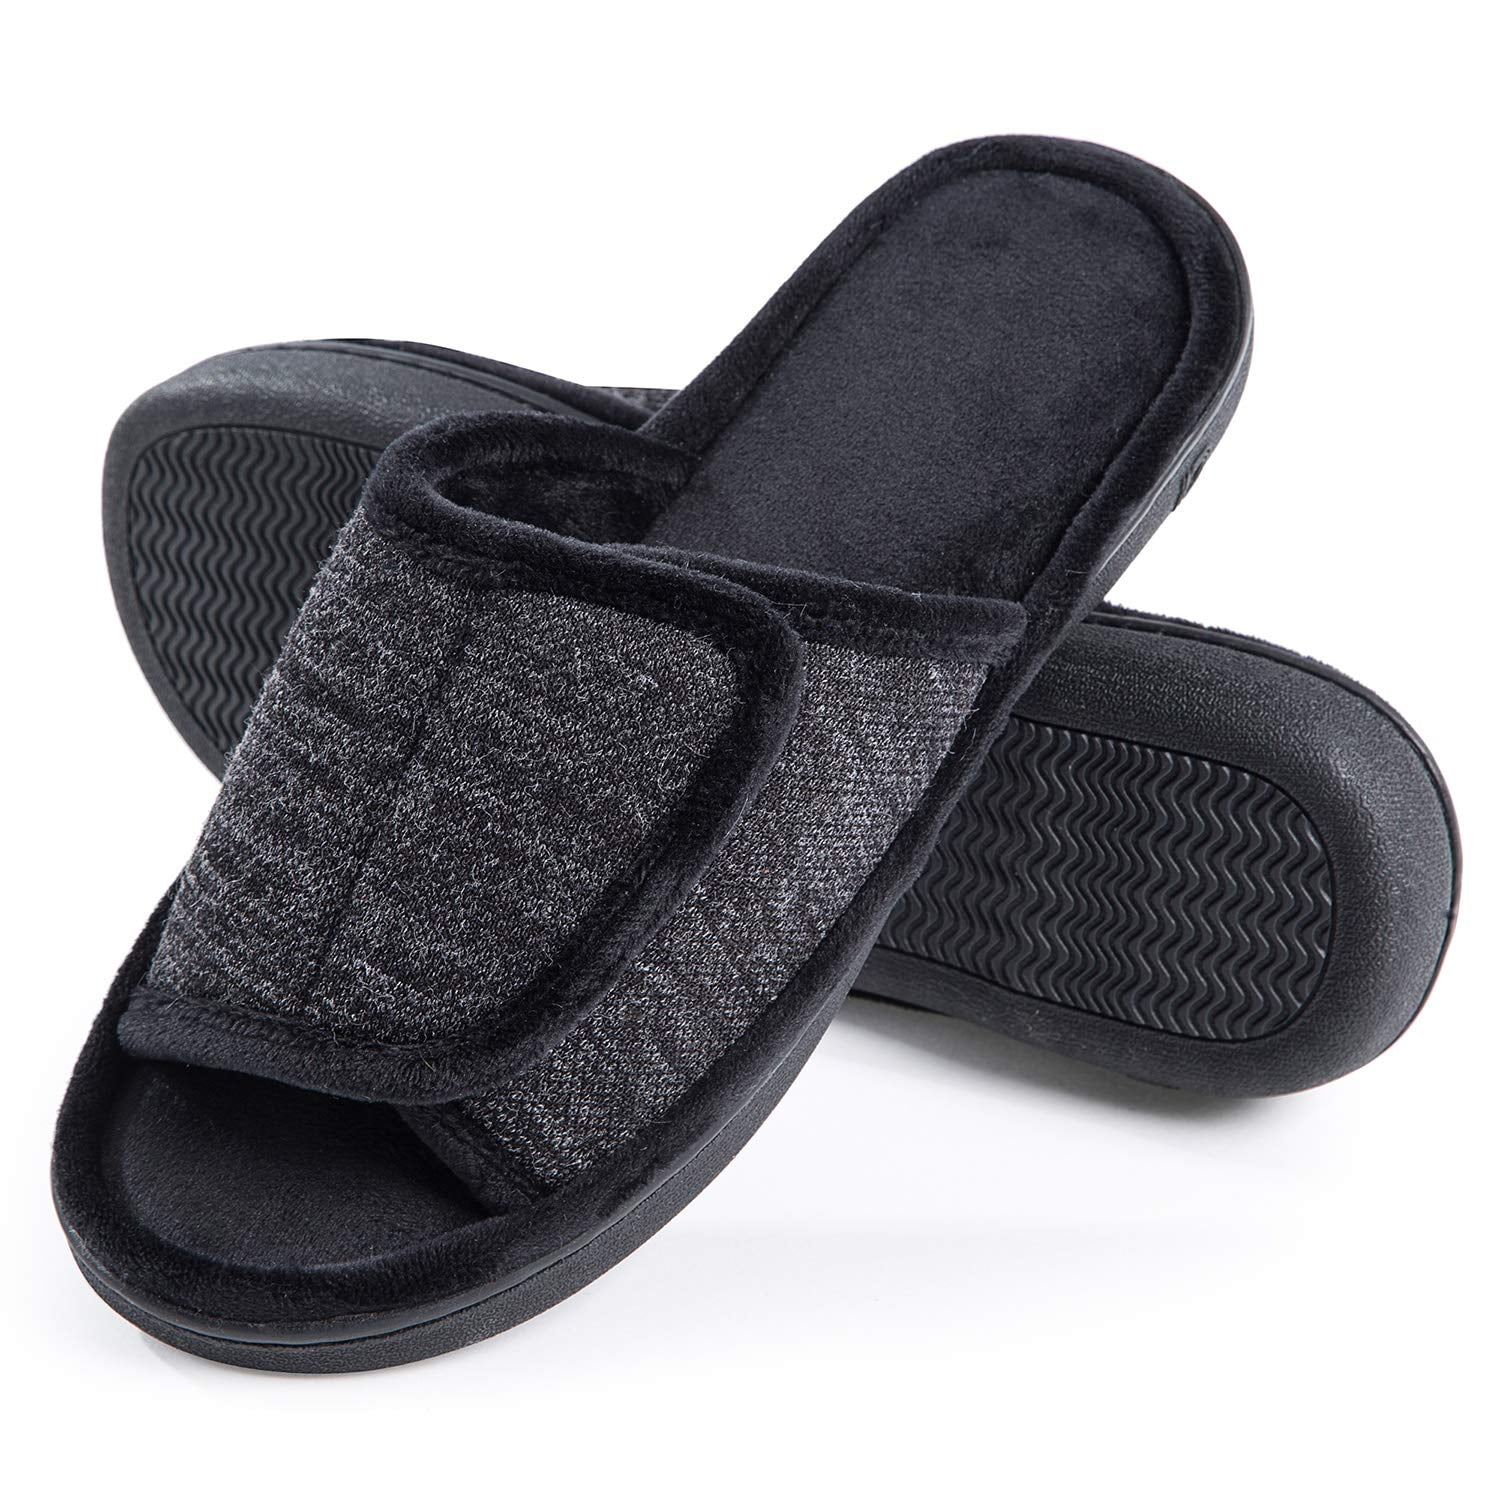 Buy Mens Slippers Memory Foam House Shoes, Adjustable Open Toe House  Slippers for Men Comfort Indoor Outdoor Shoes, Cozy Breathable Slide Velcor  Bedroom Slipper Shoes Online at Lowest Price in Ubuy Singapore.